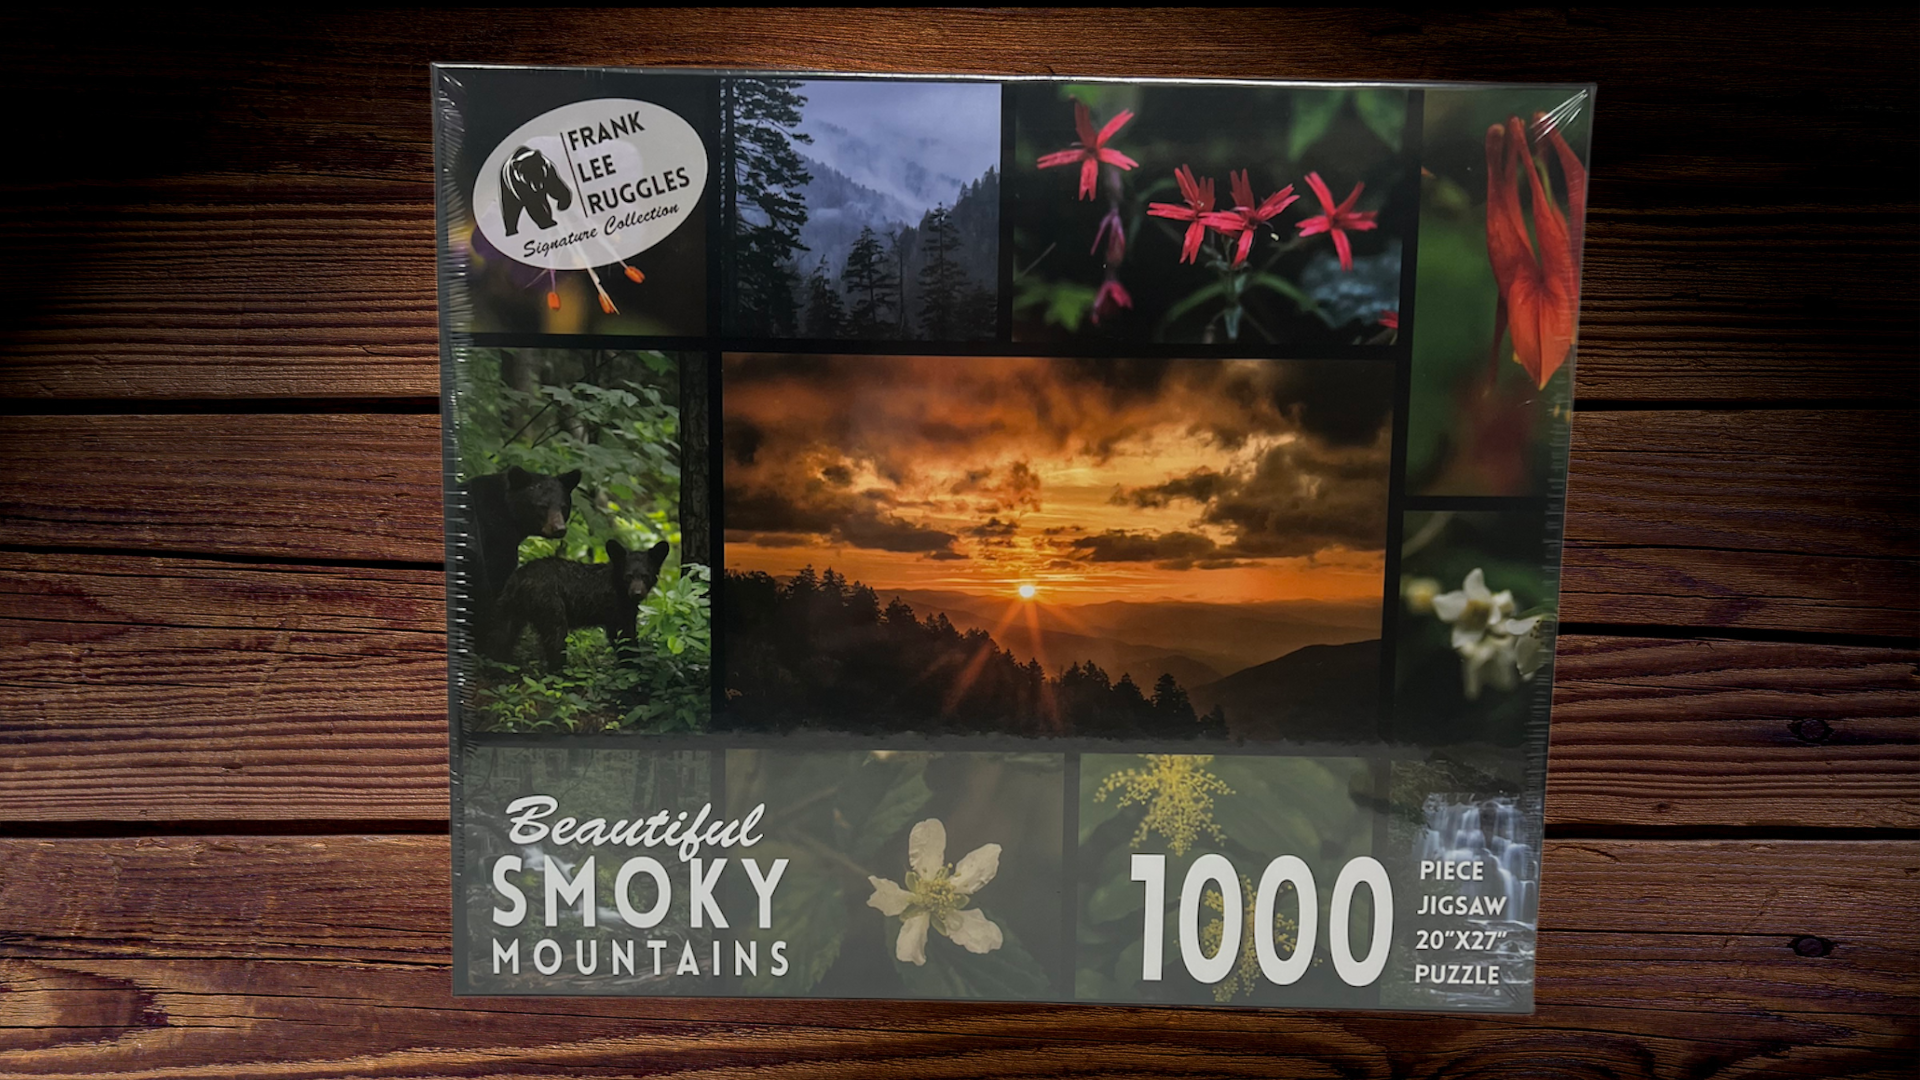 Grand Canyon – 1000 Piece Jigsaw Puzzle – Education Outdoors